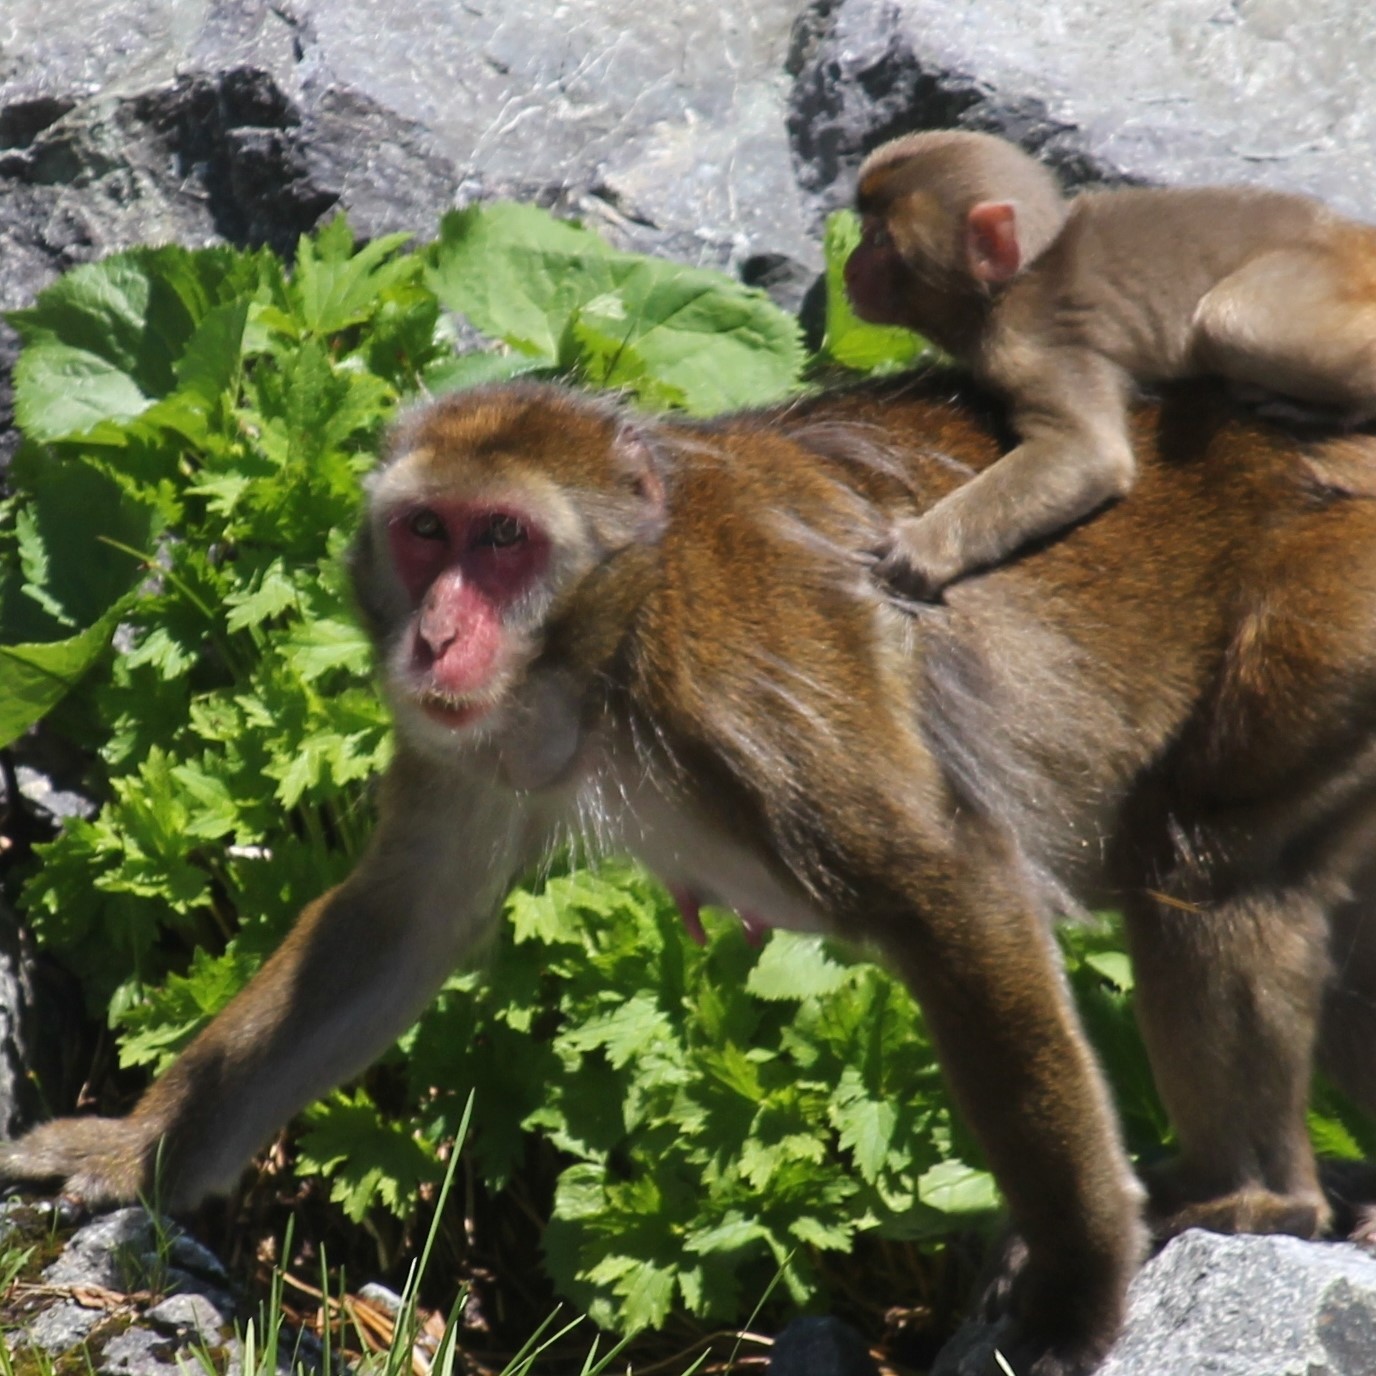 A photo of an adult macaque and her baby. The baby is on the mother's back as she walks on all fours. They are both gray with pink faces.